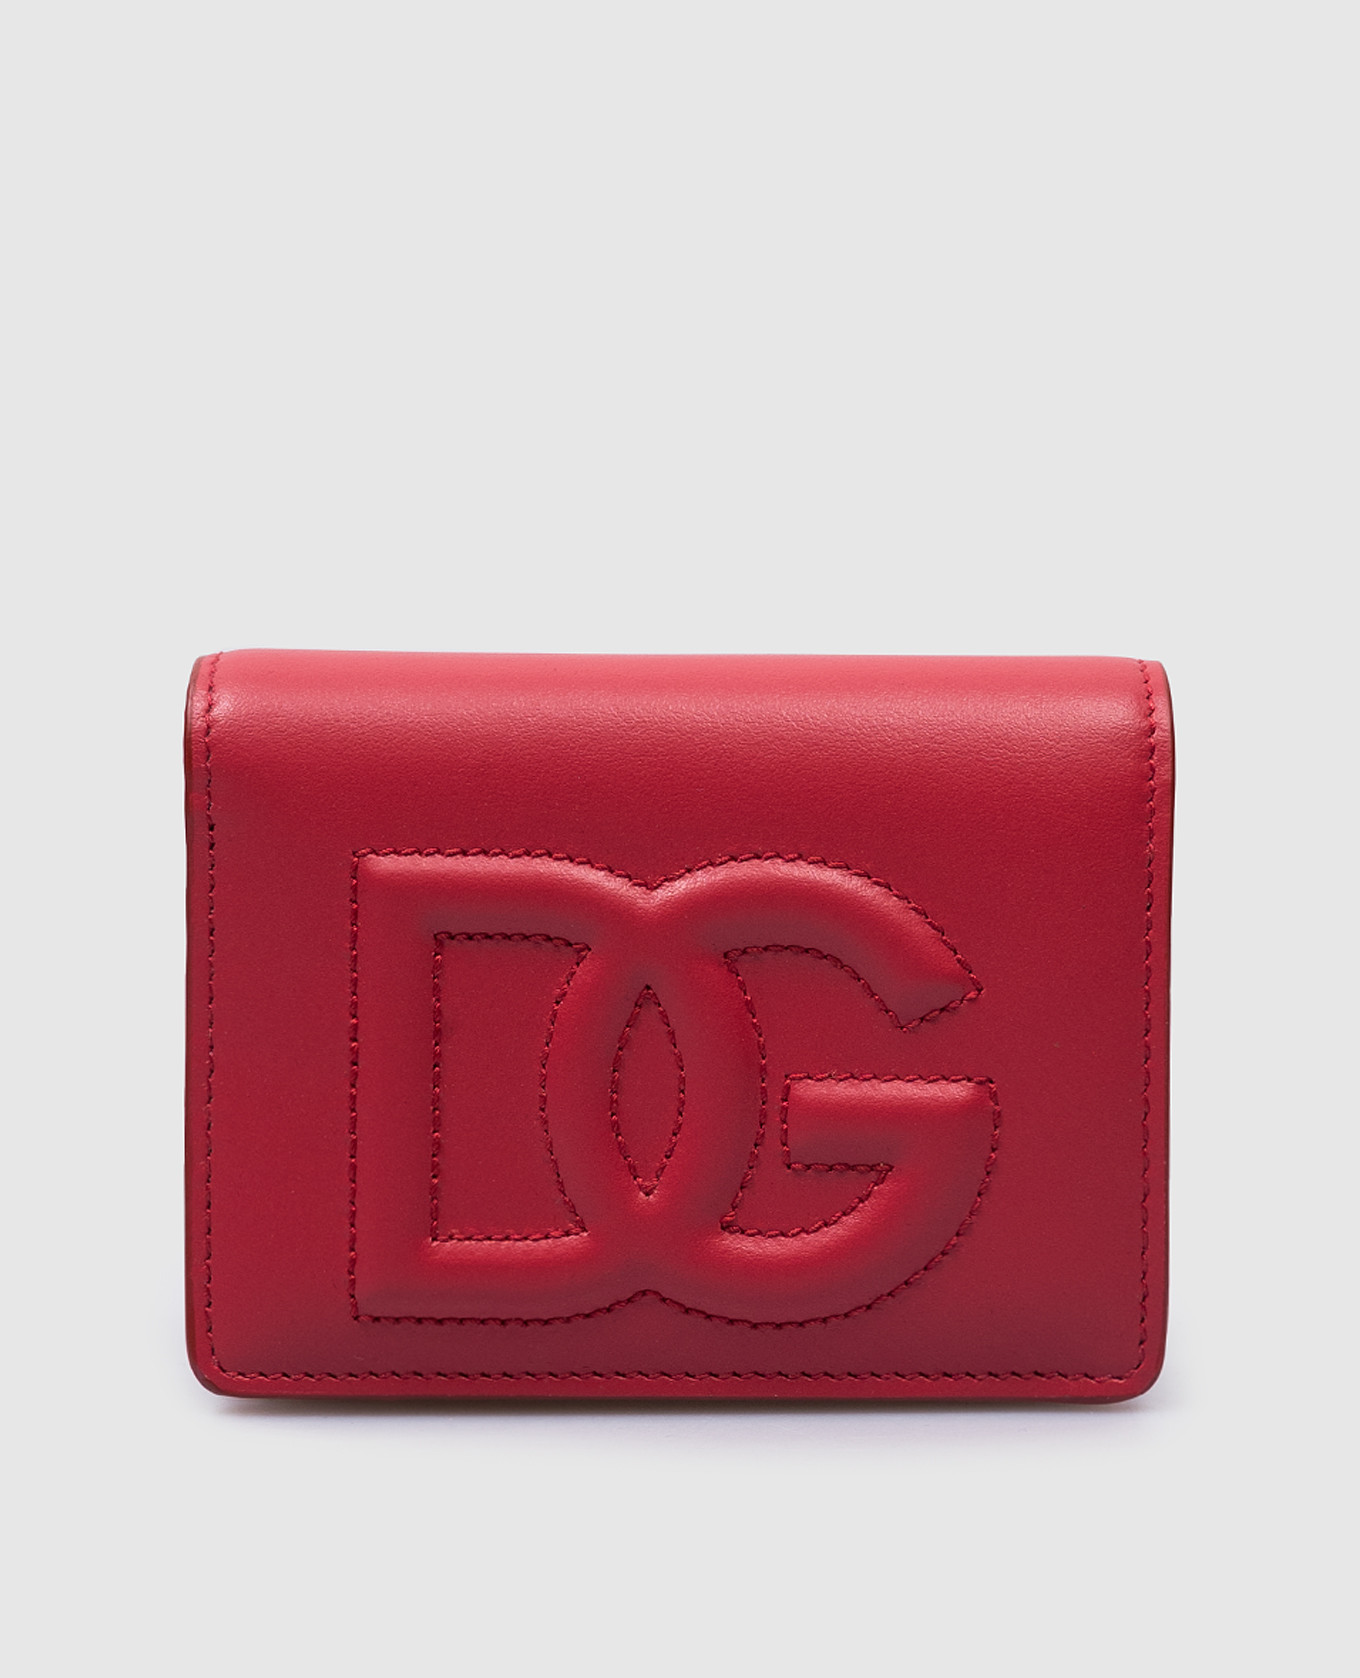 Red leather purse with textured logo